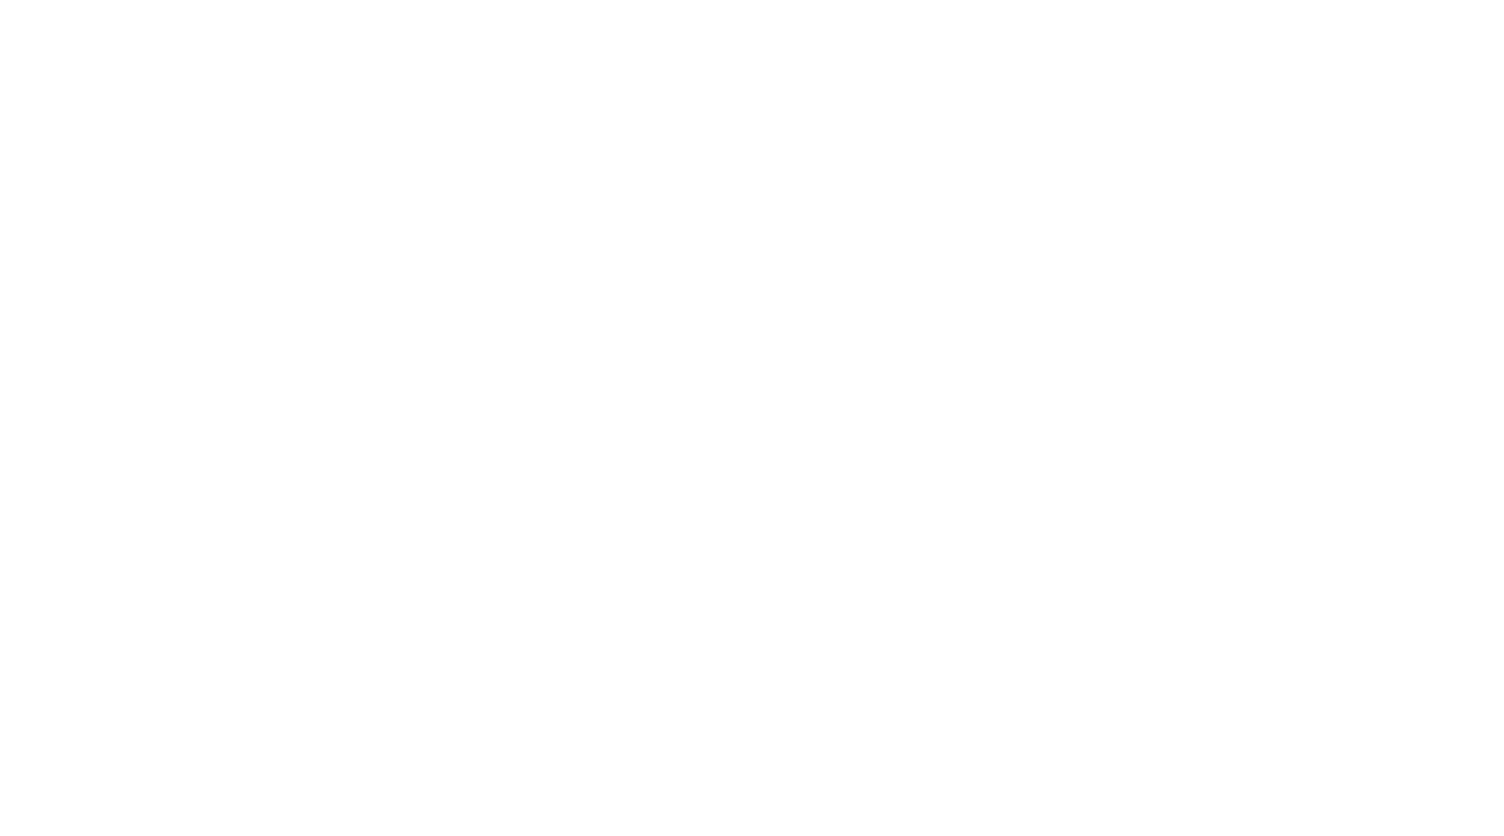 「Sincere × Classy」We make your life and properties sophisticated. Life and proper from SHIROKANE.